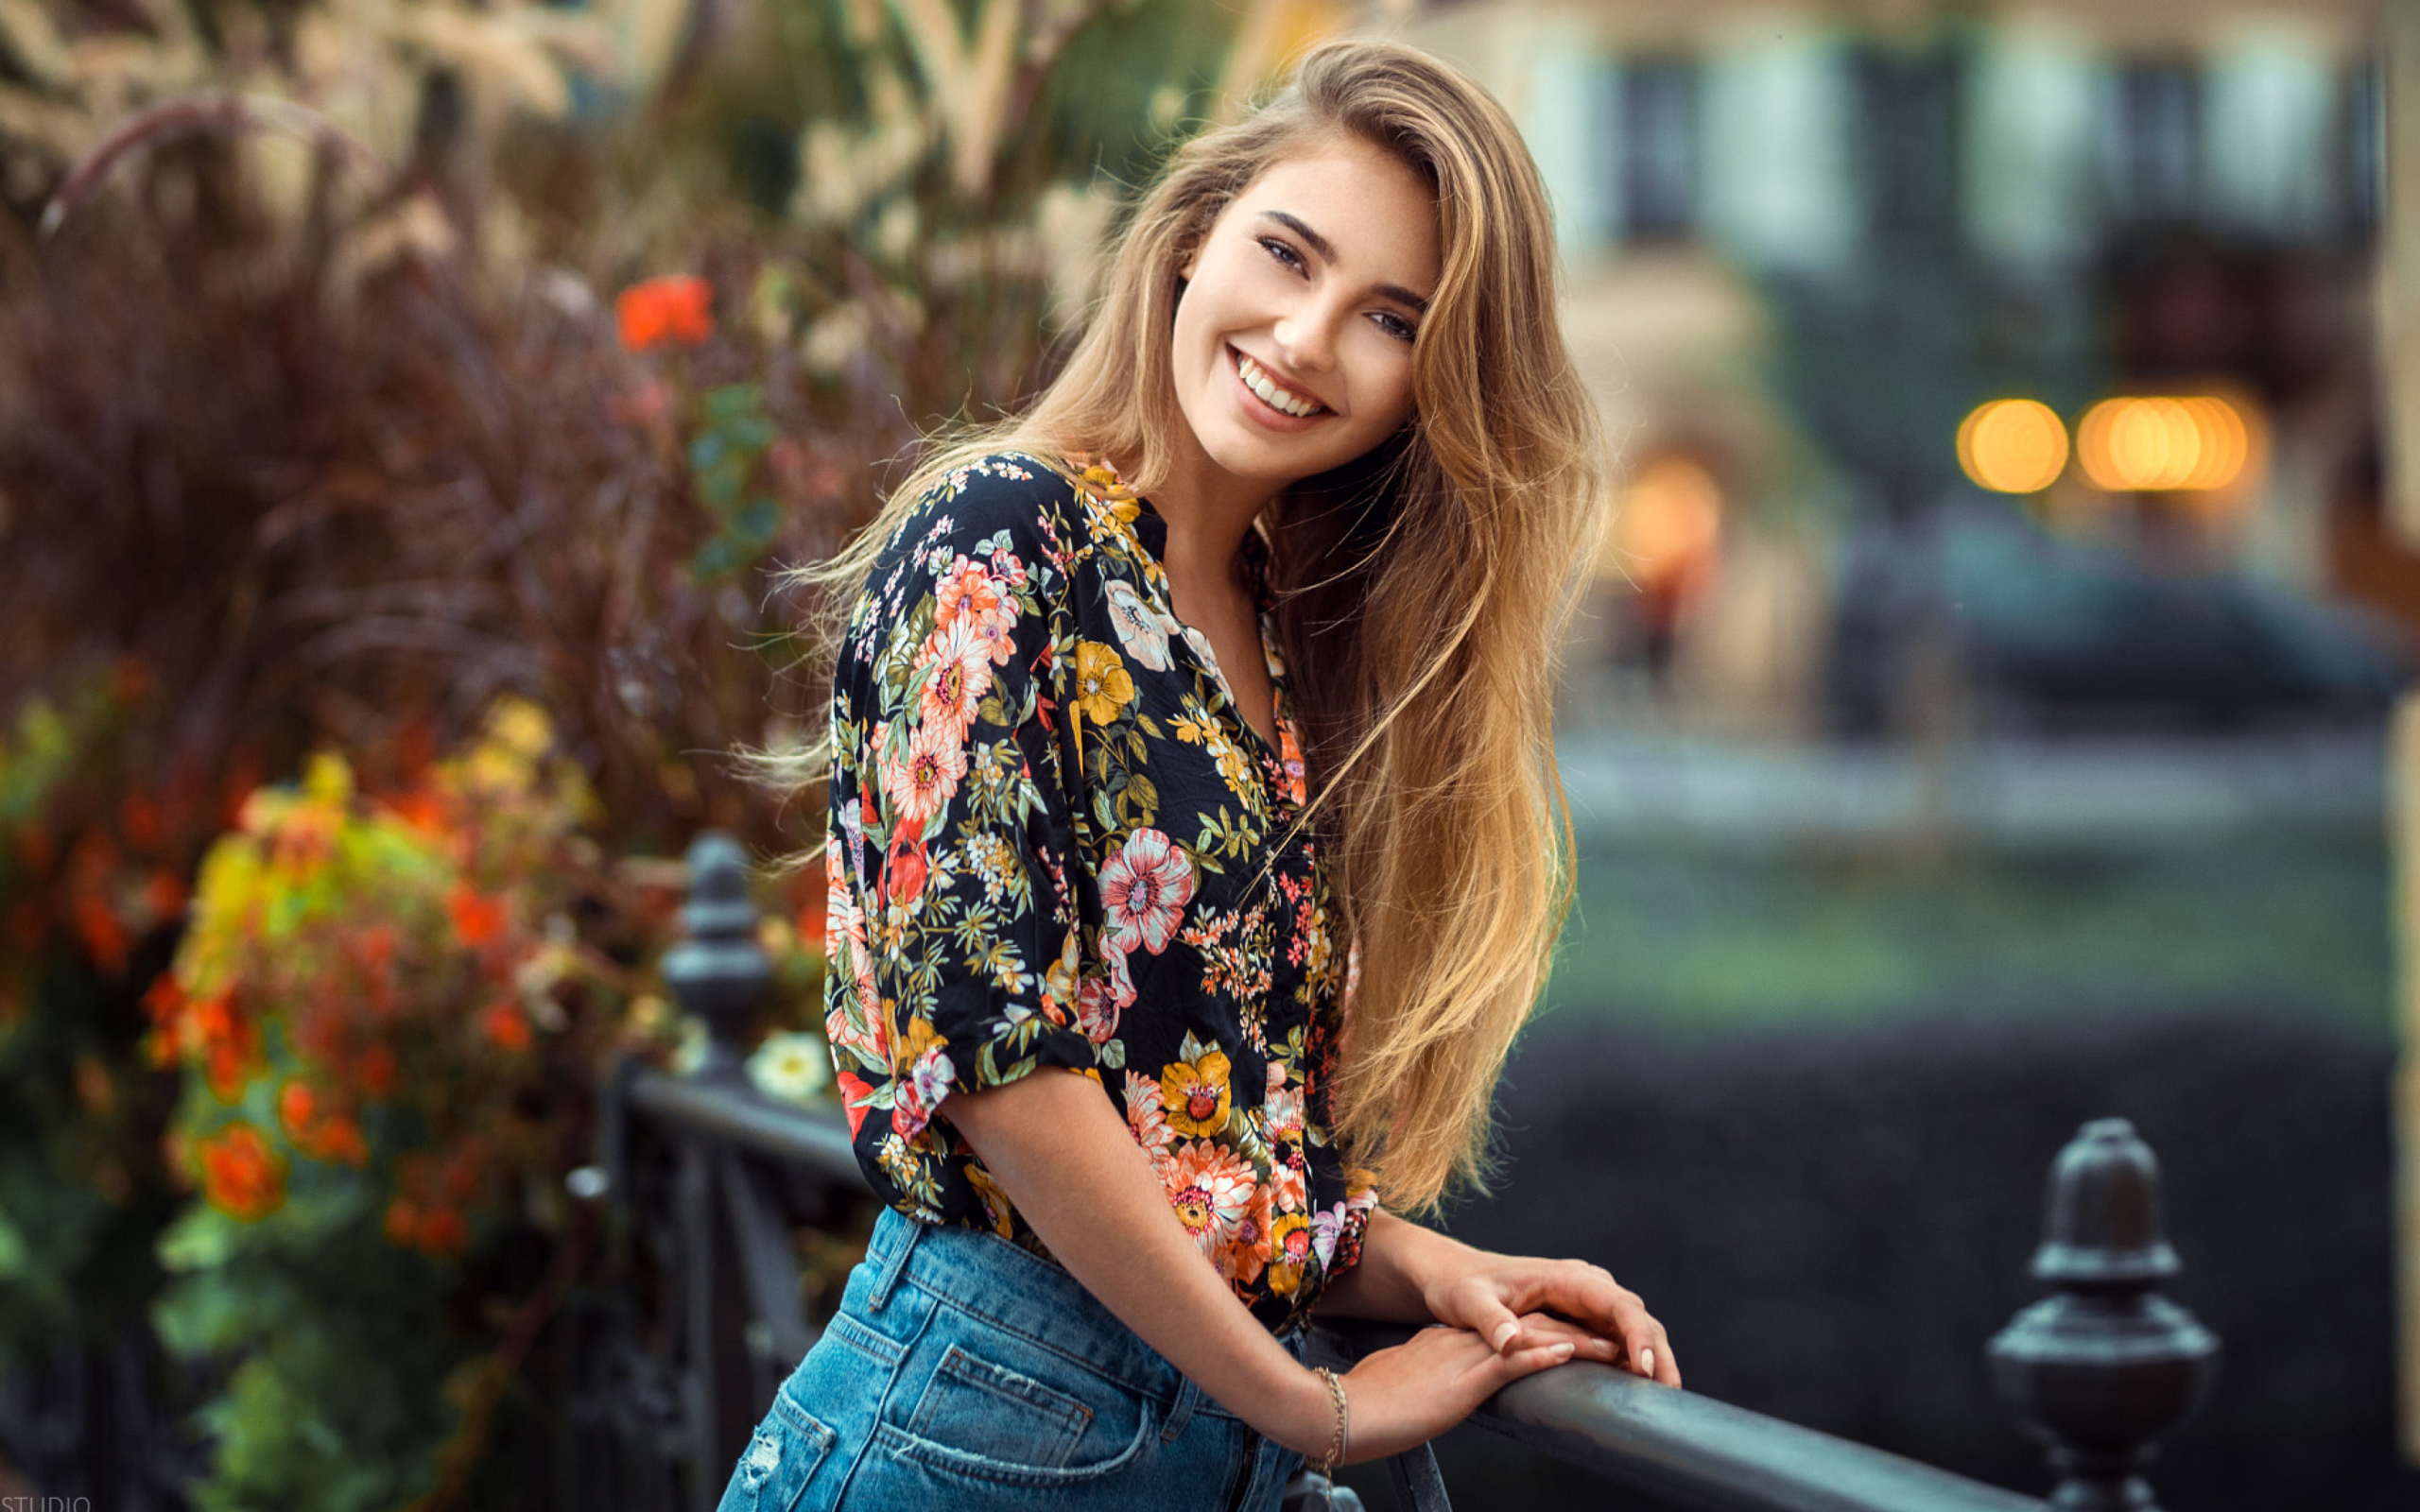 Smiling girl with long hair